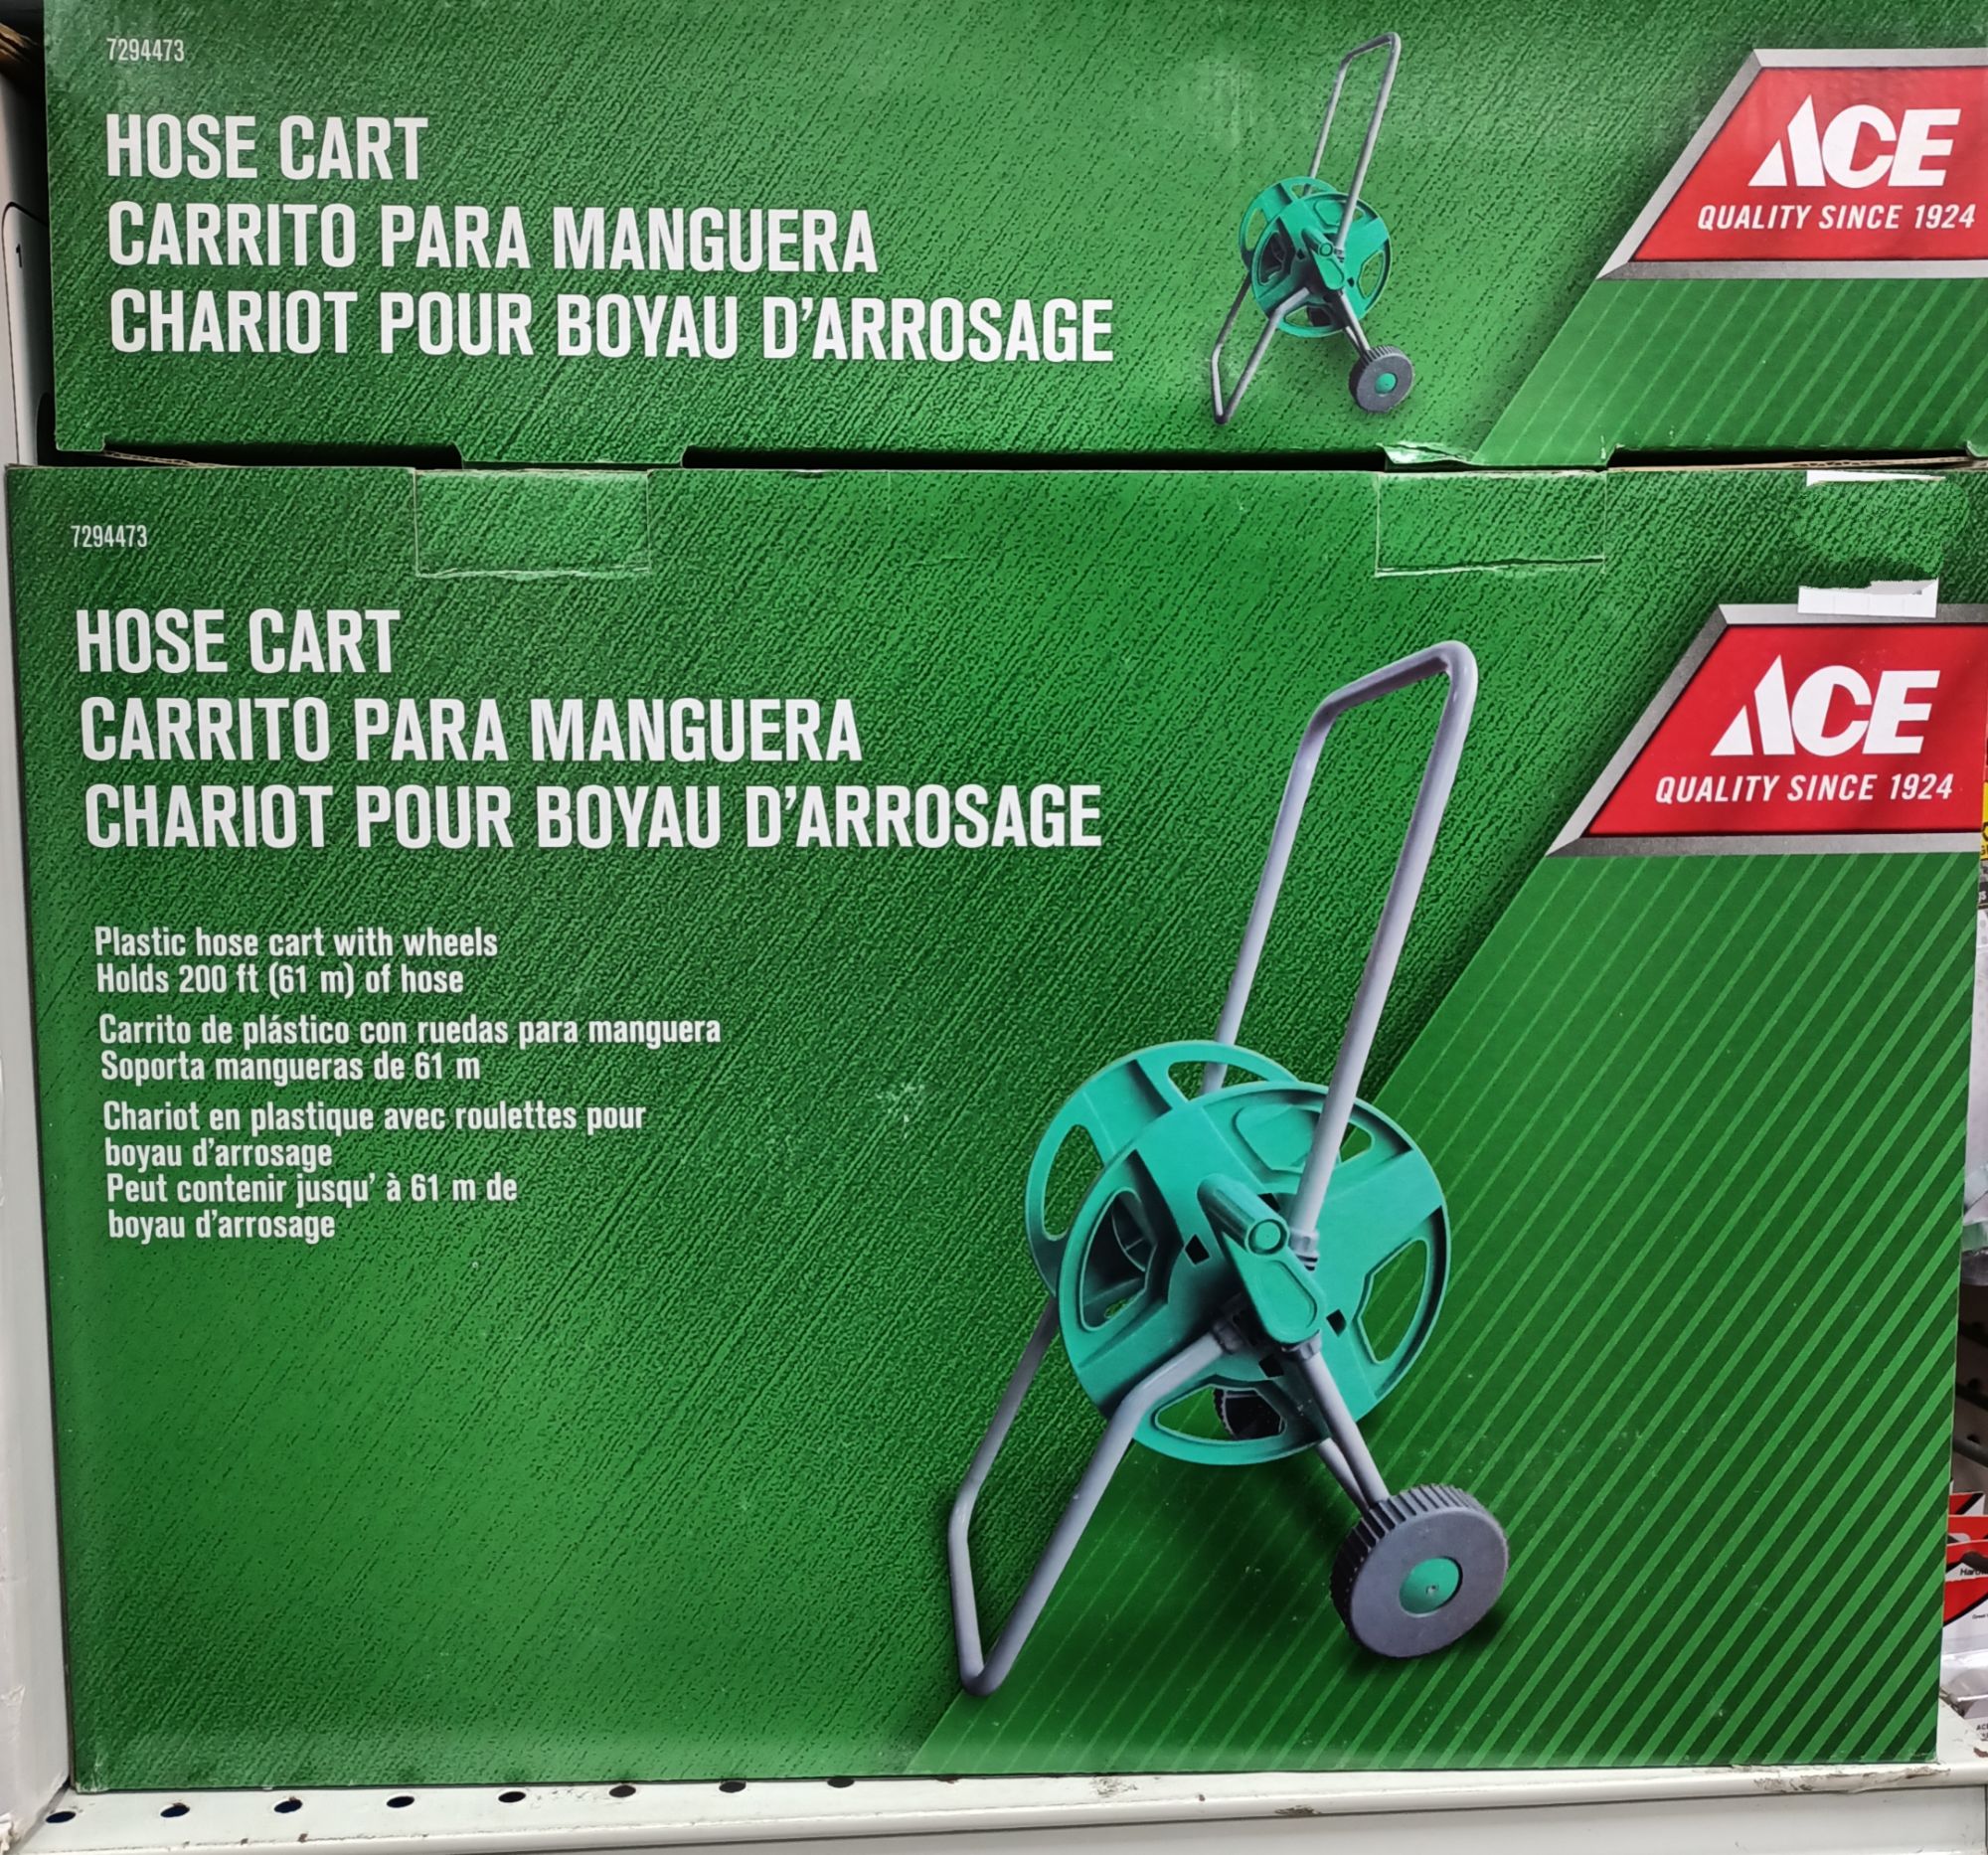 Shop Garden Hose With Reel Cart With Wheels with great discounts